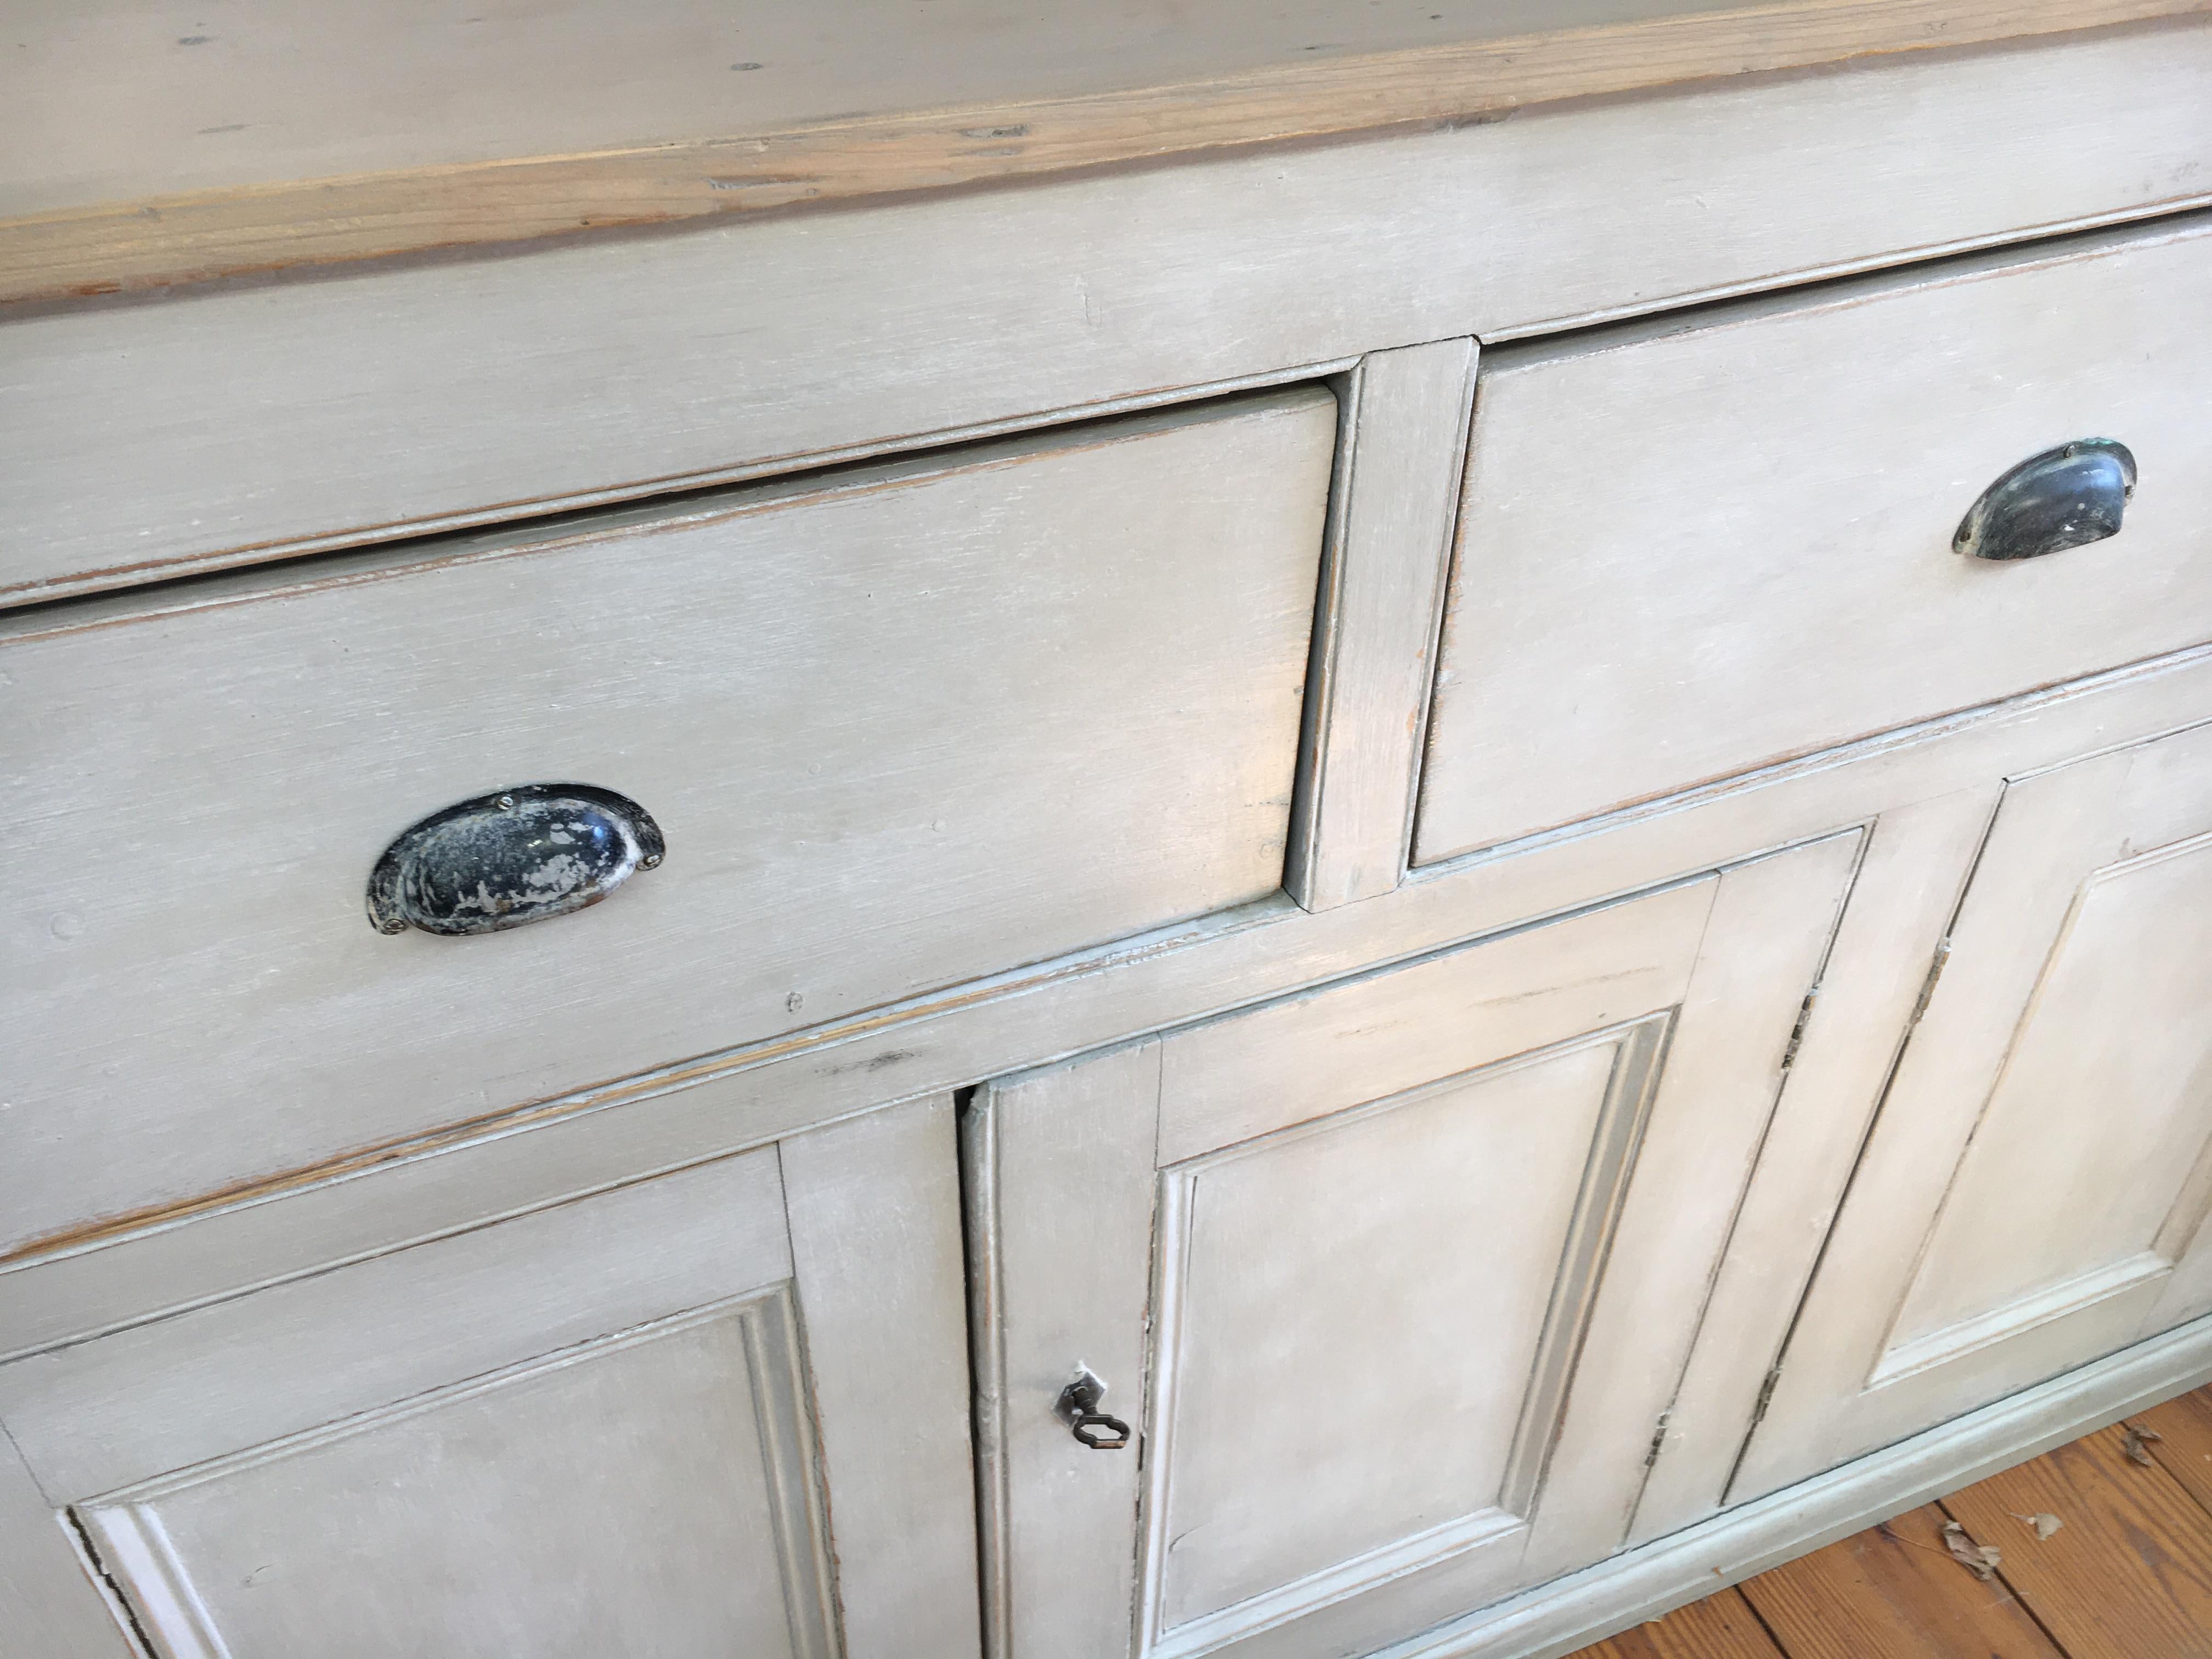 A gorgeous light grey painted base with a light scrubbed pine top and metal pulls, combined with 2 locks and keys. If that weren't enough there is much storage space available inside with shelves. A really, really good looking piece